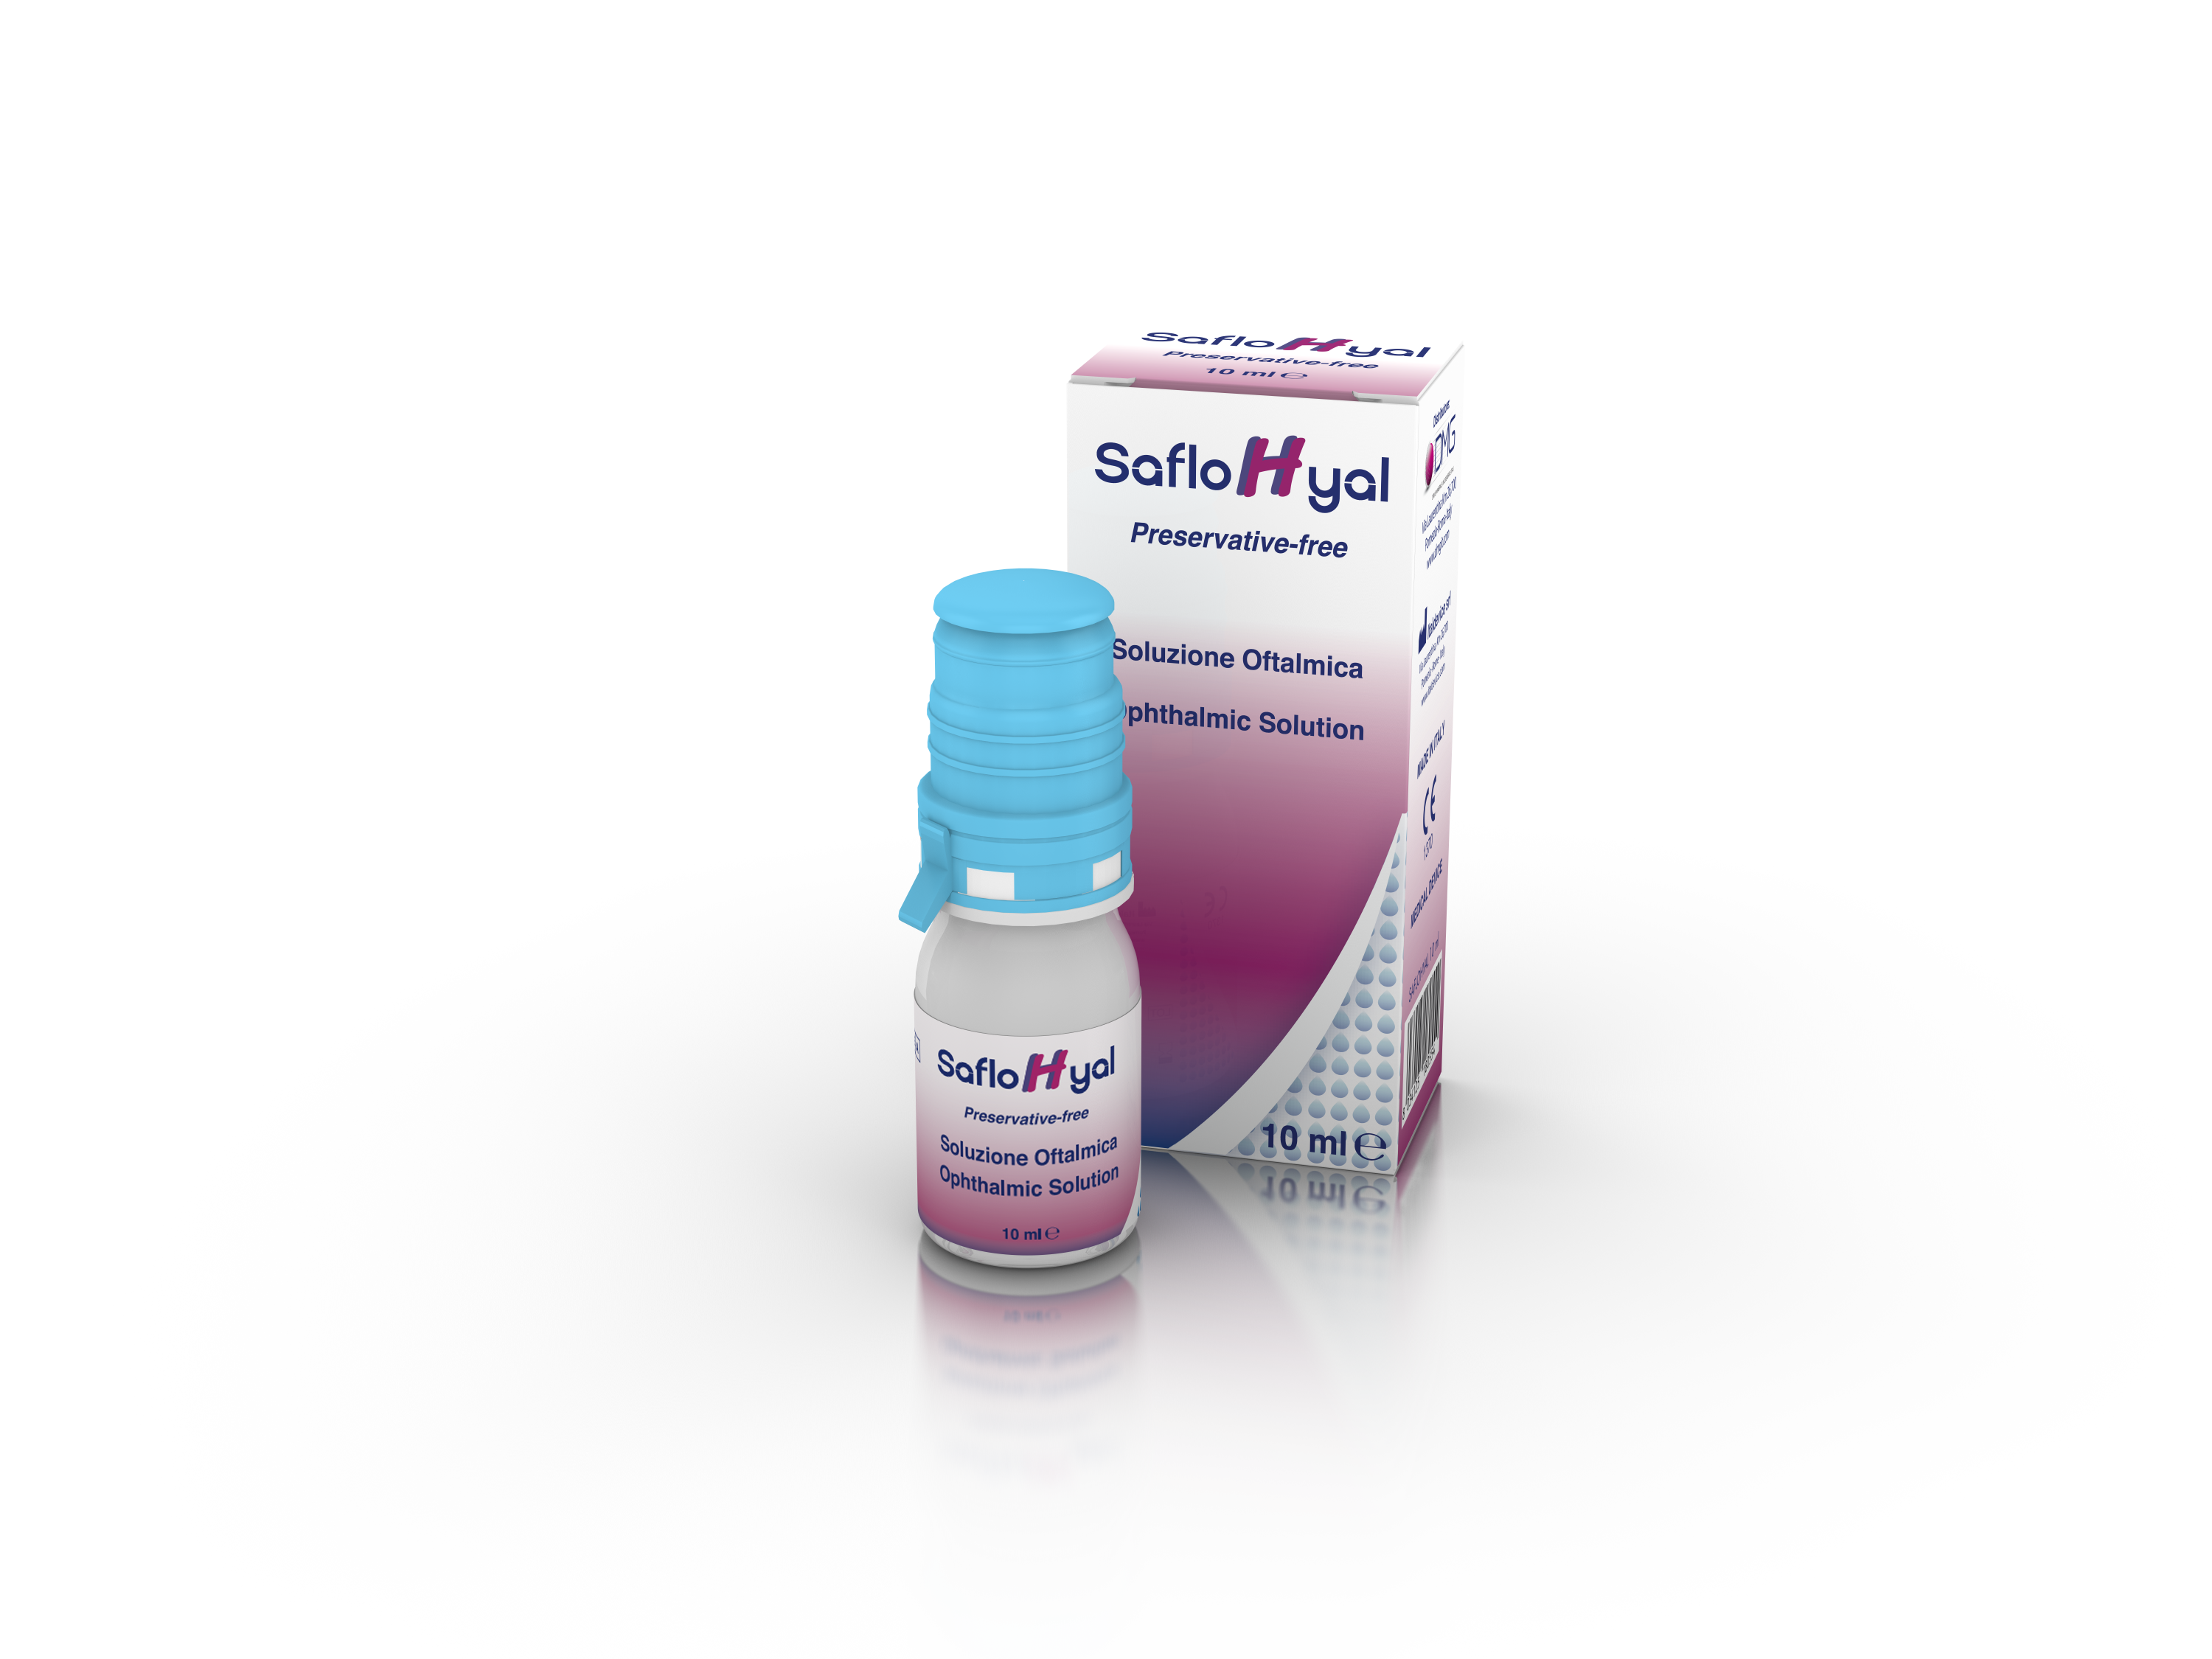 ENOXOFTAL / SAFLOHYAL - A greater effectiveness in case of ocular inflammation - Preservative Free Ophthalmic Solution